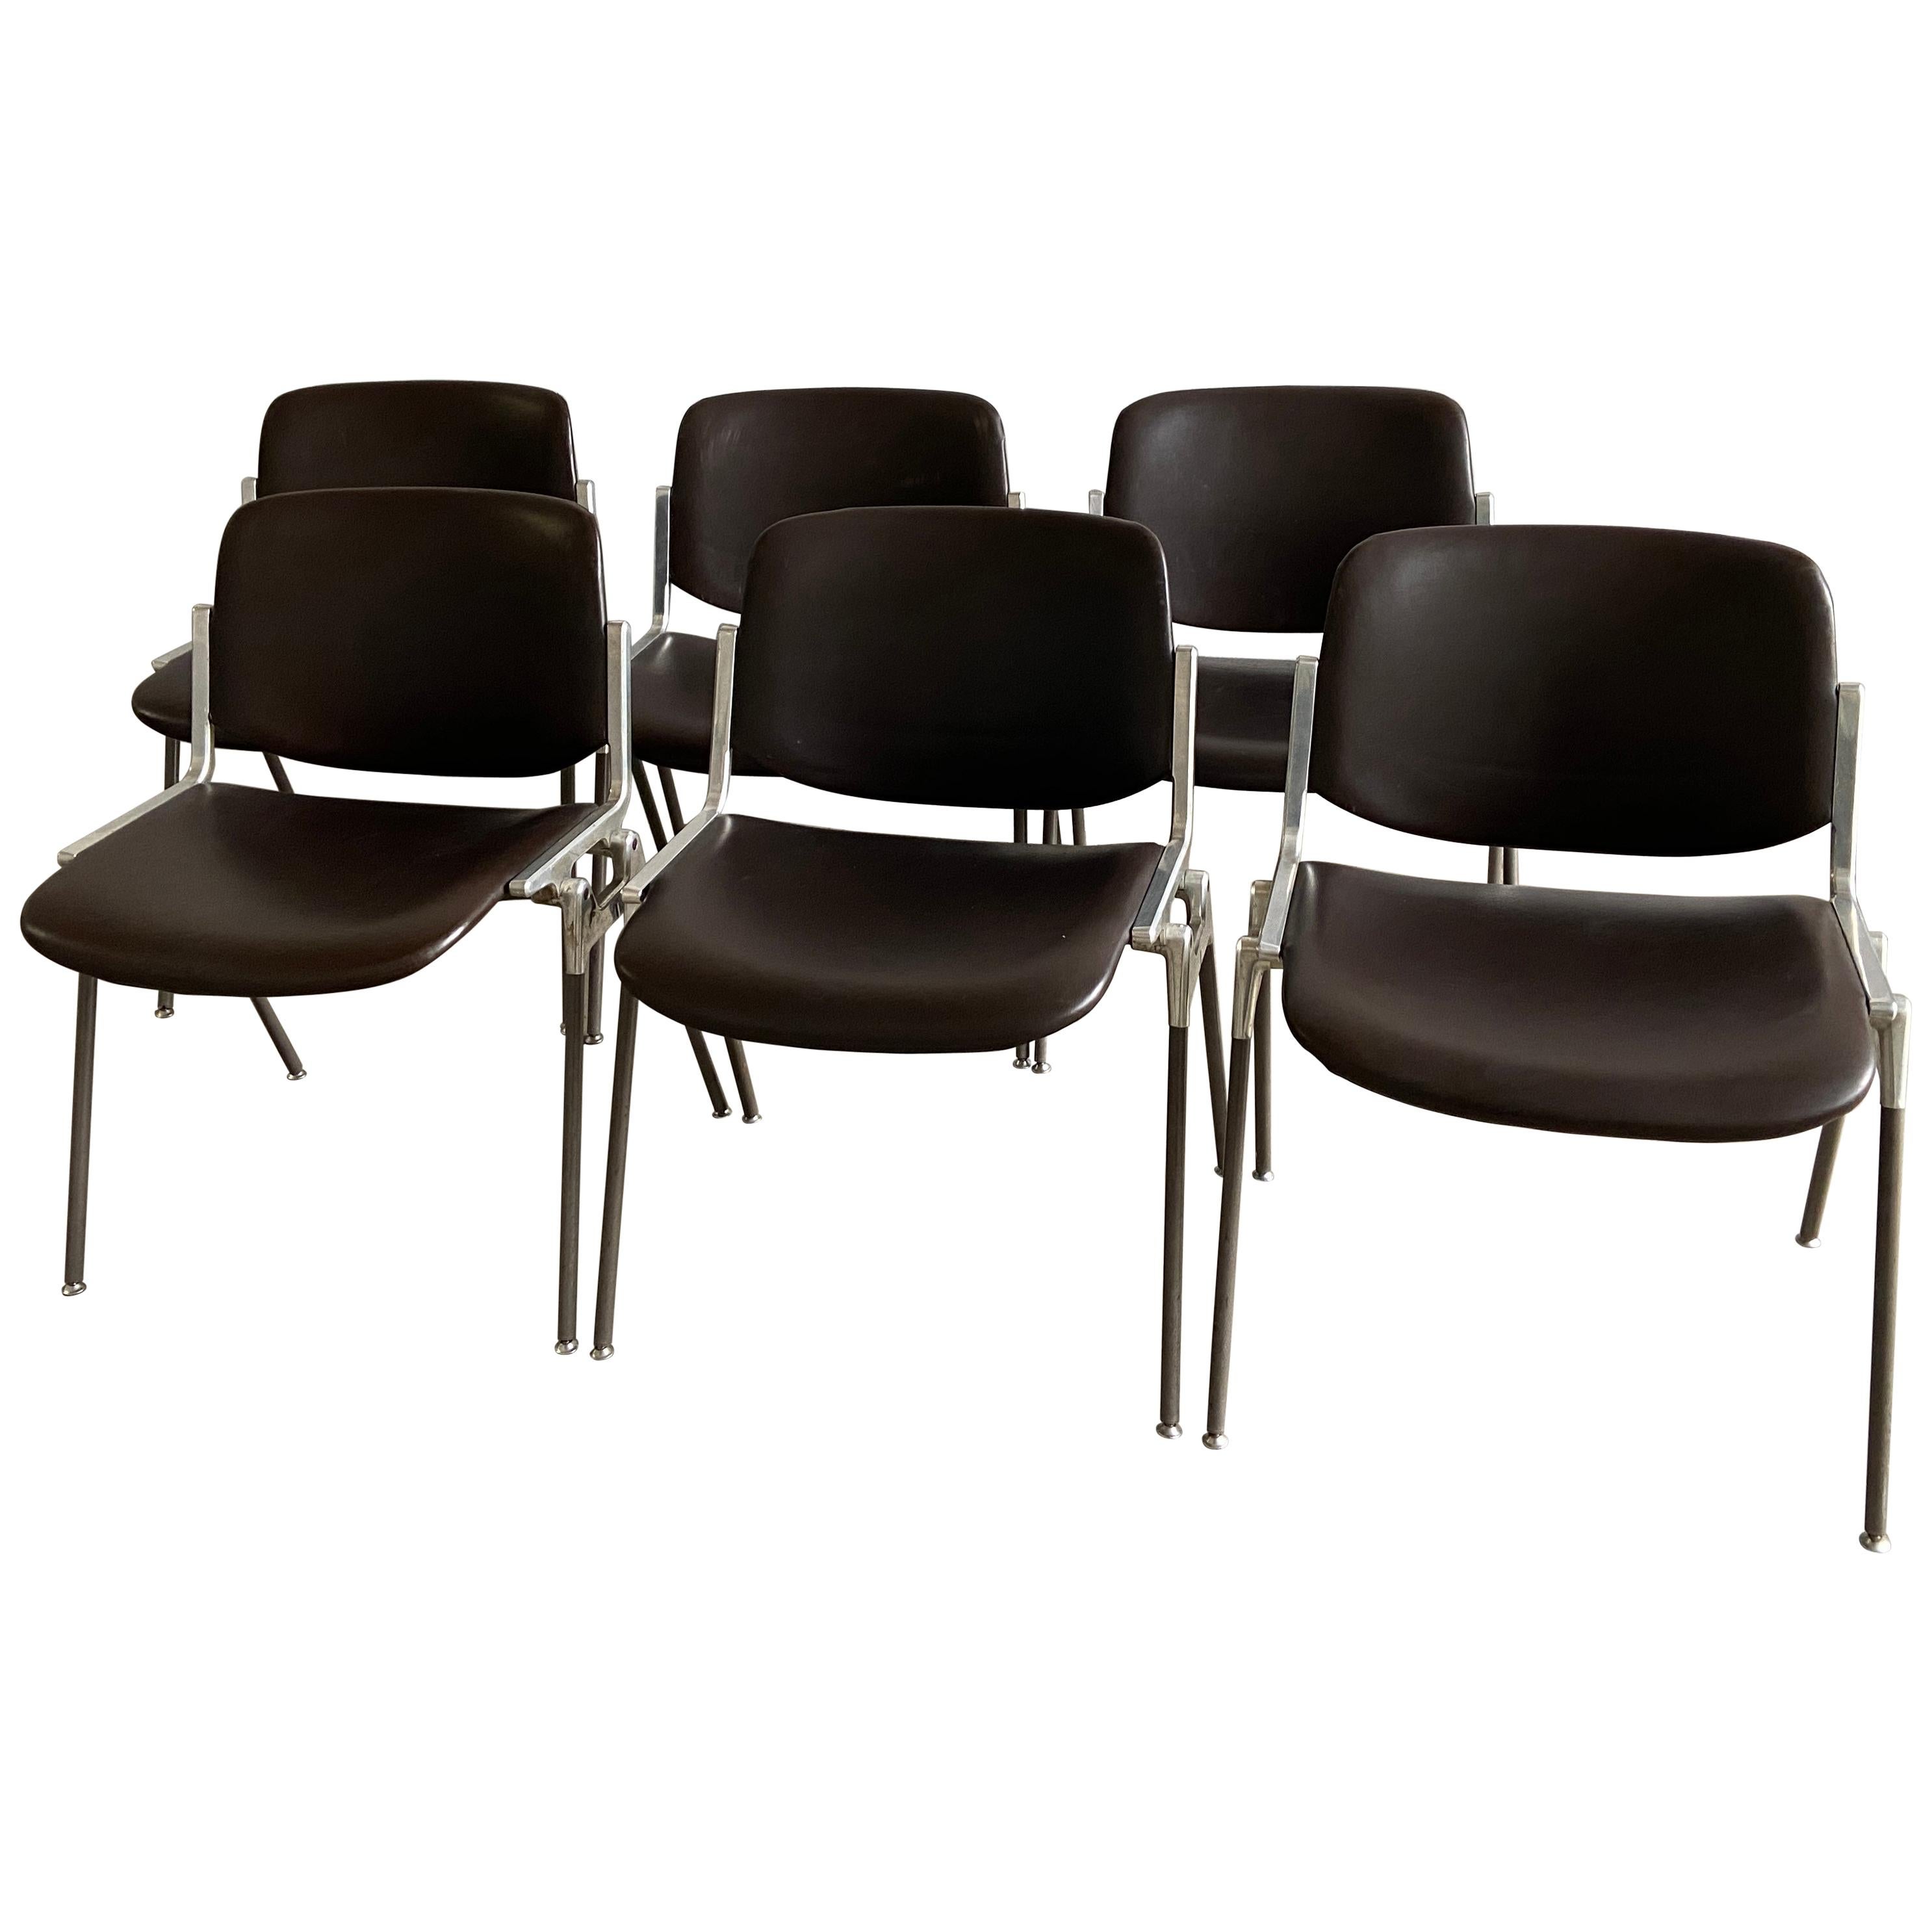 Mid-Century Modern Italian 6 Stackable Chairs by Giancarlo Piretti for Castelli